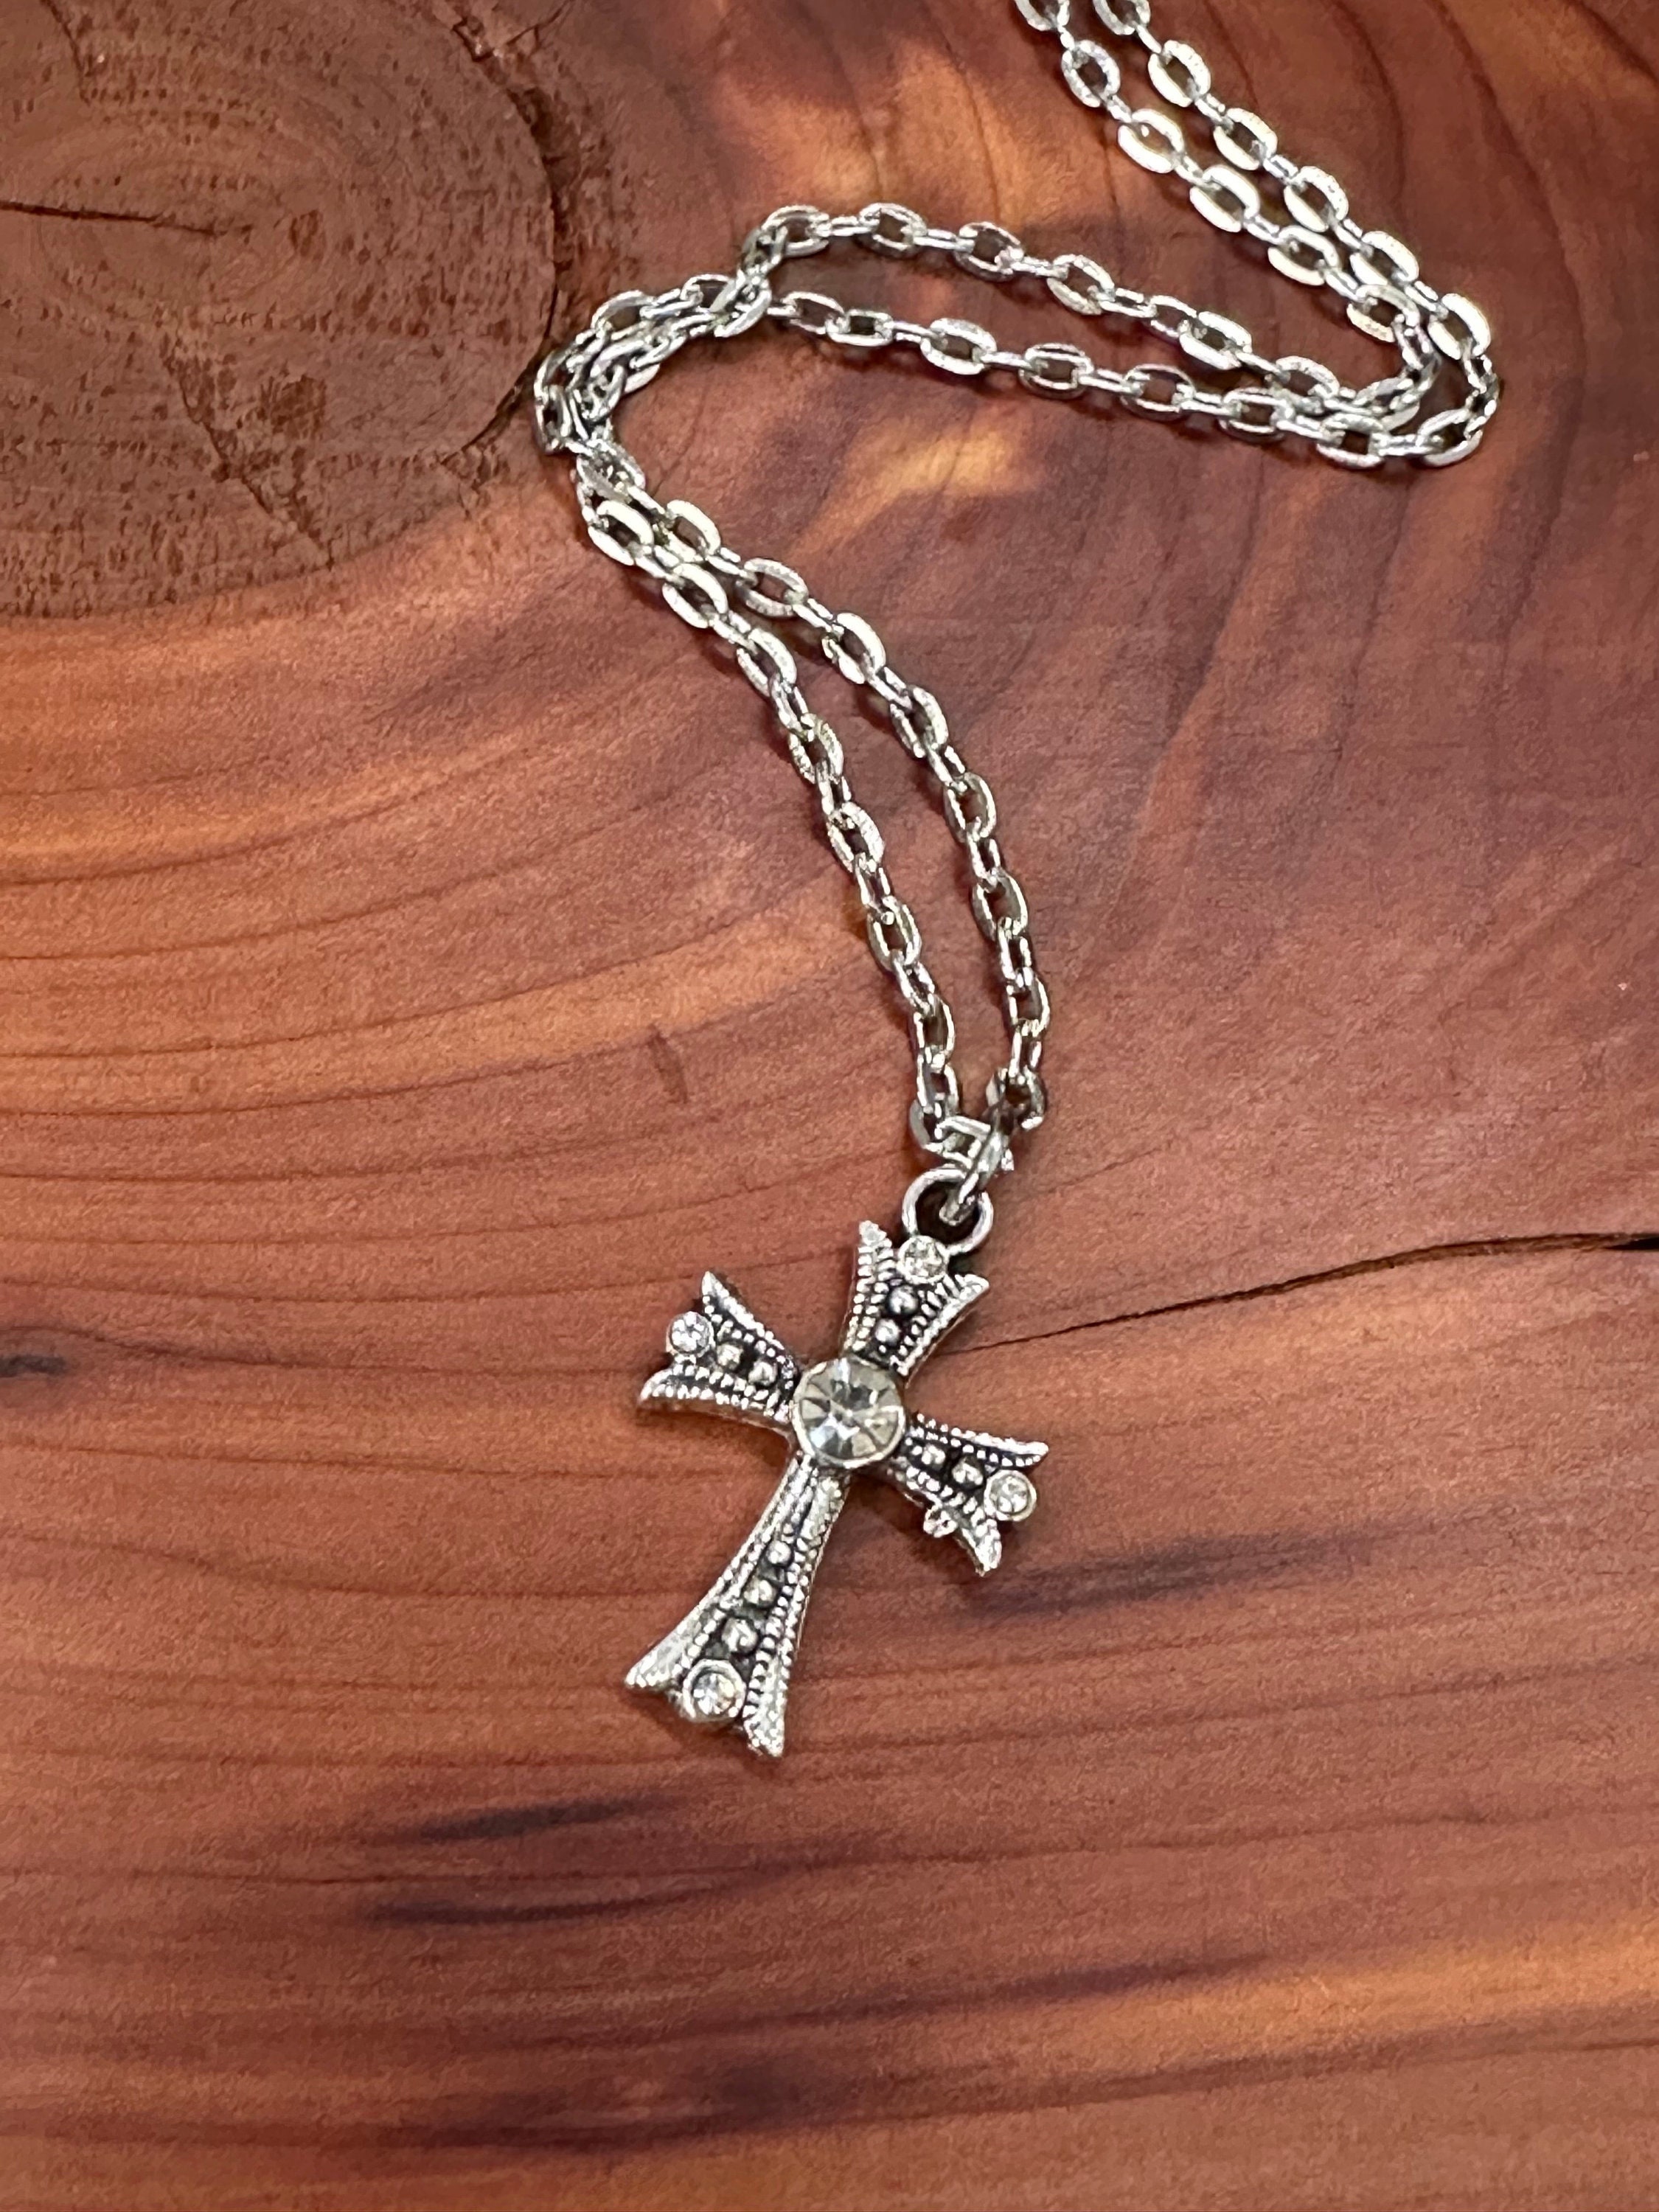 Aesthetic Grunge Necklace Y2k Jewelry Gothic Cross -  Israel